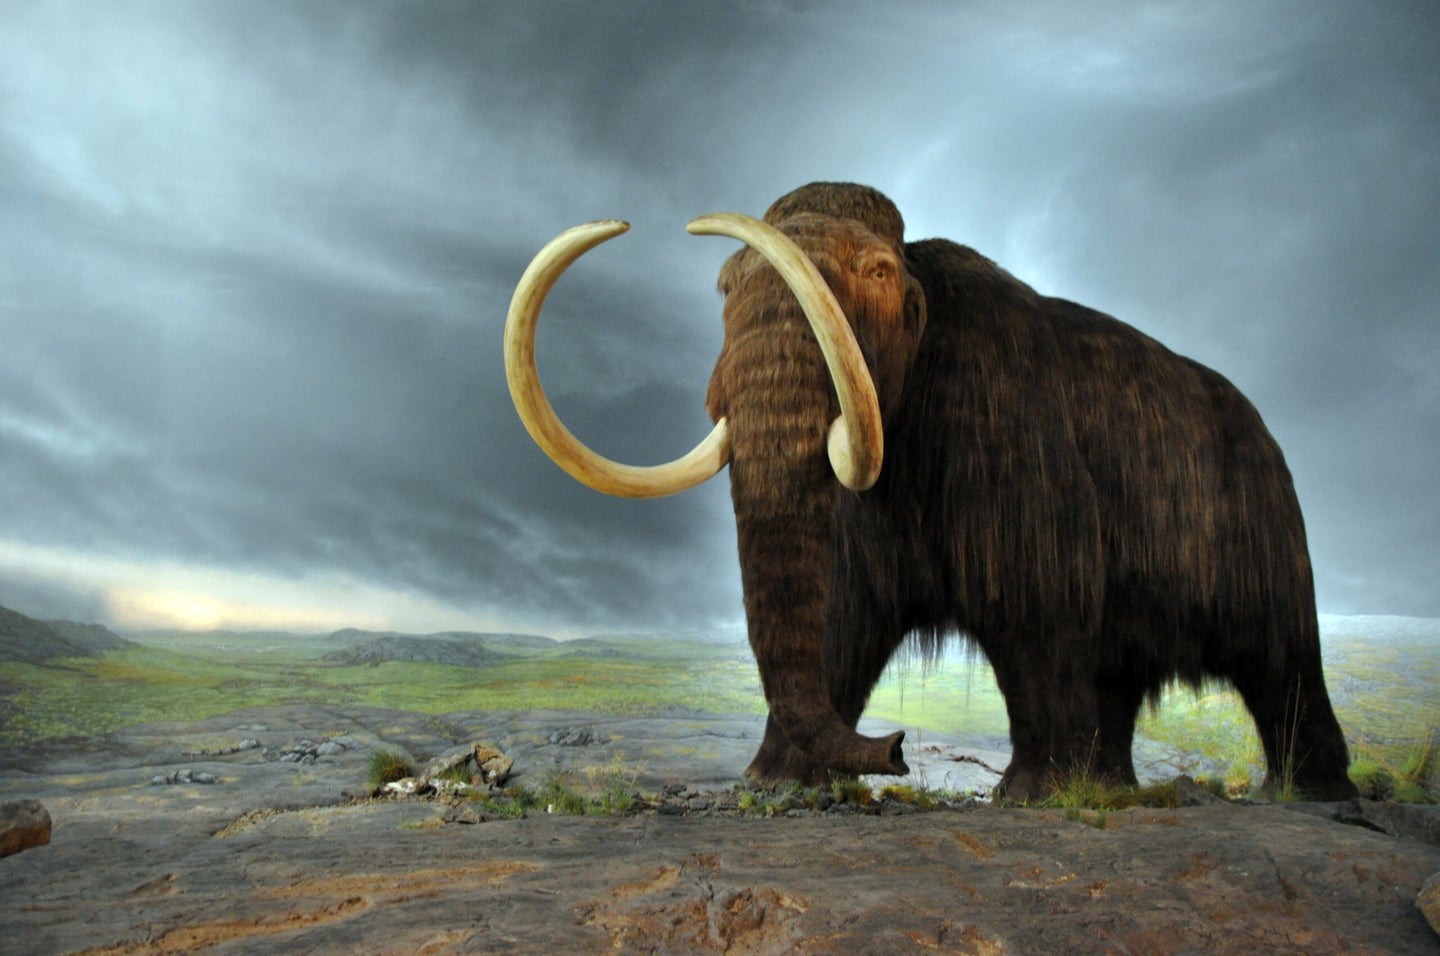 Woolly mammoths disappeared between 14,000 and 10,000 years ago due to a combination of hunting and climate change.